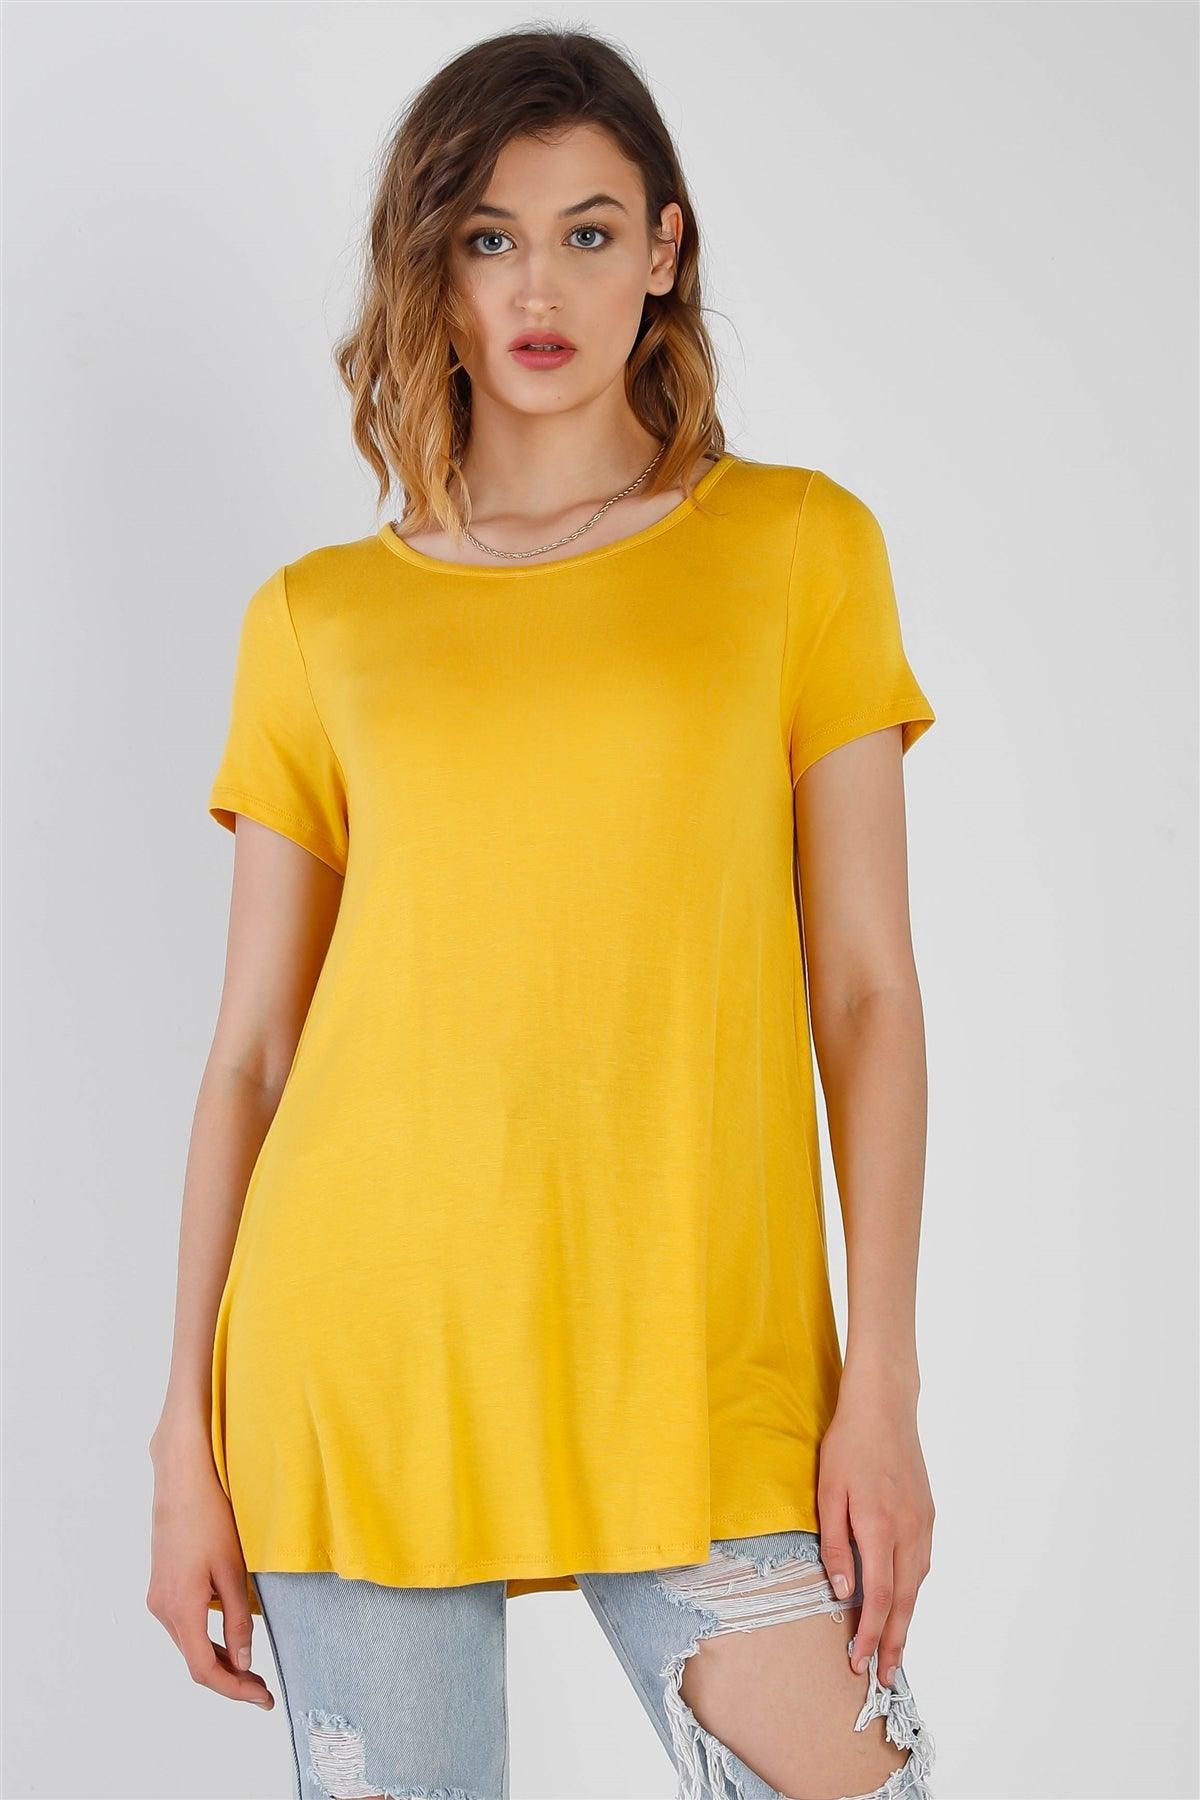 Yellow Short Sleeve Relaxed Fit Top /1-2-2-1